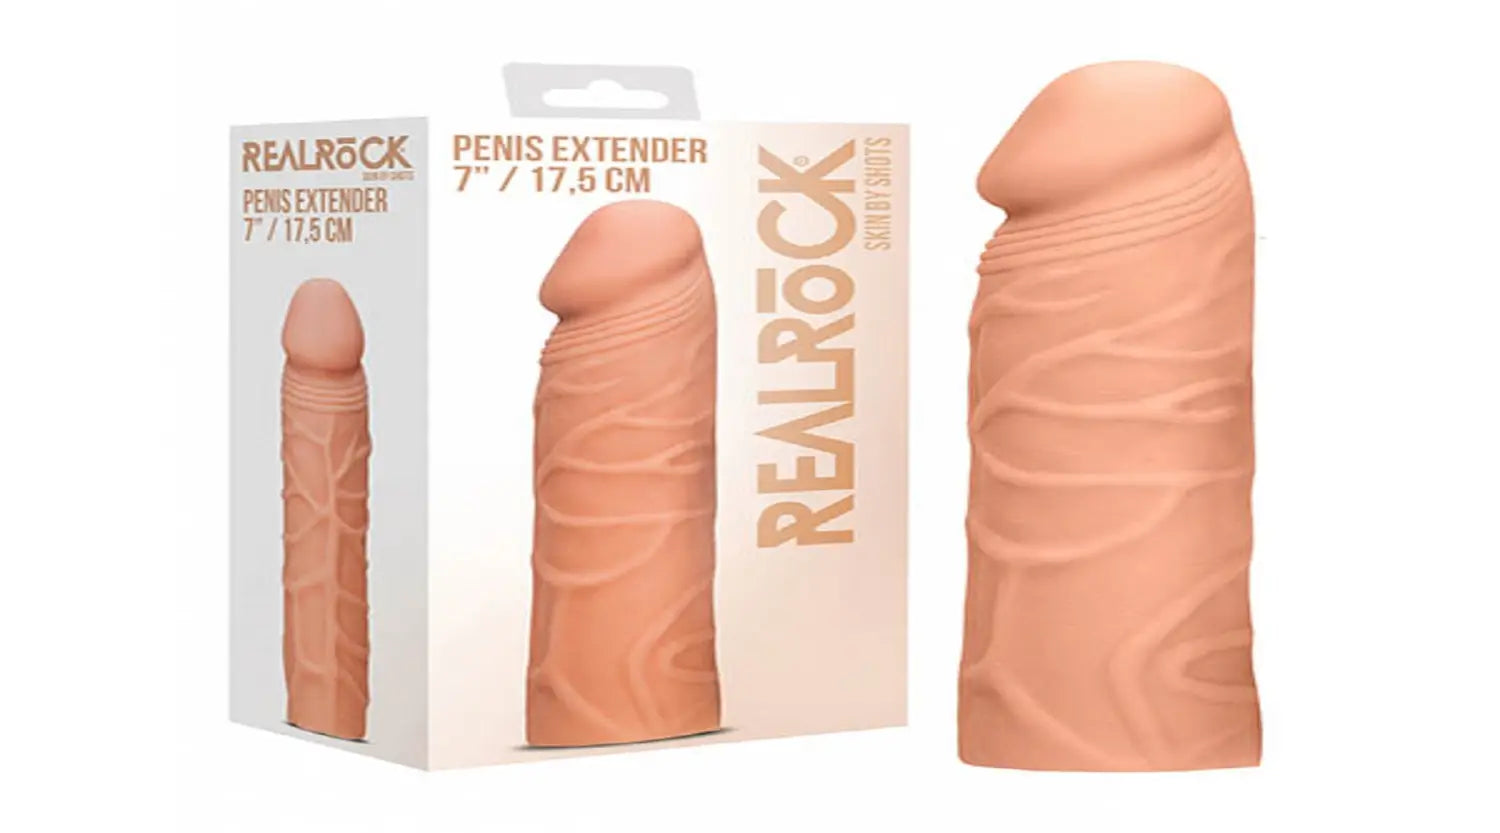 REALRoCK Dildo Sex Toy Review by a Sexpert